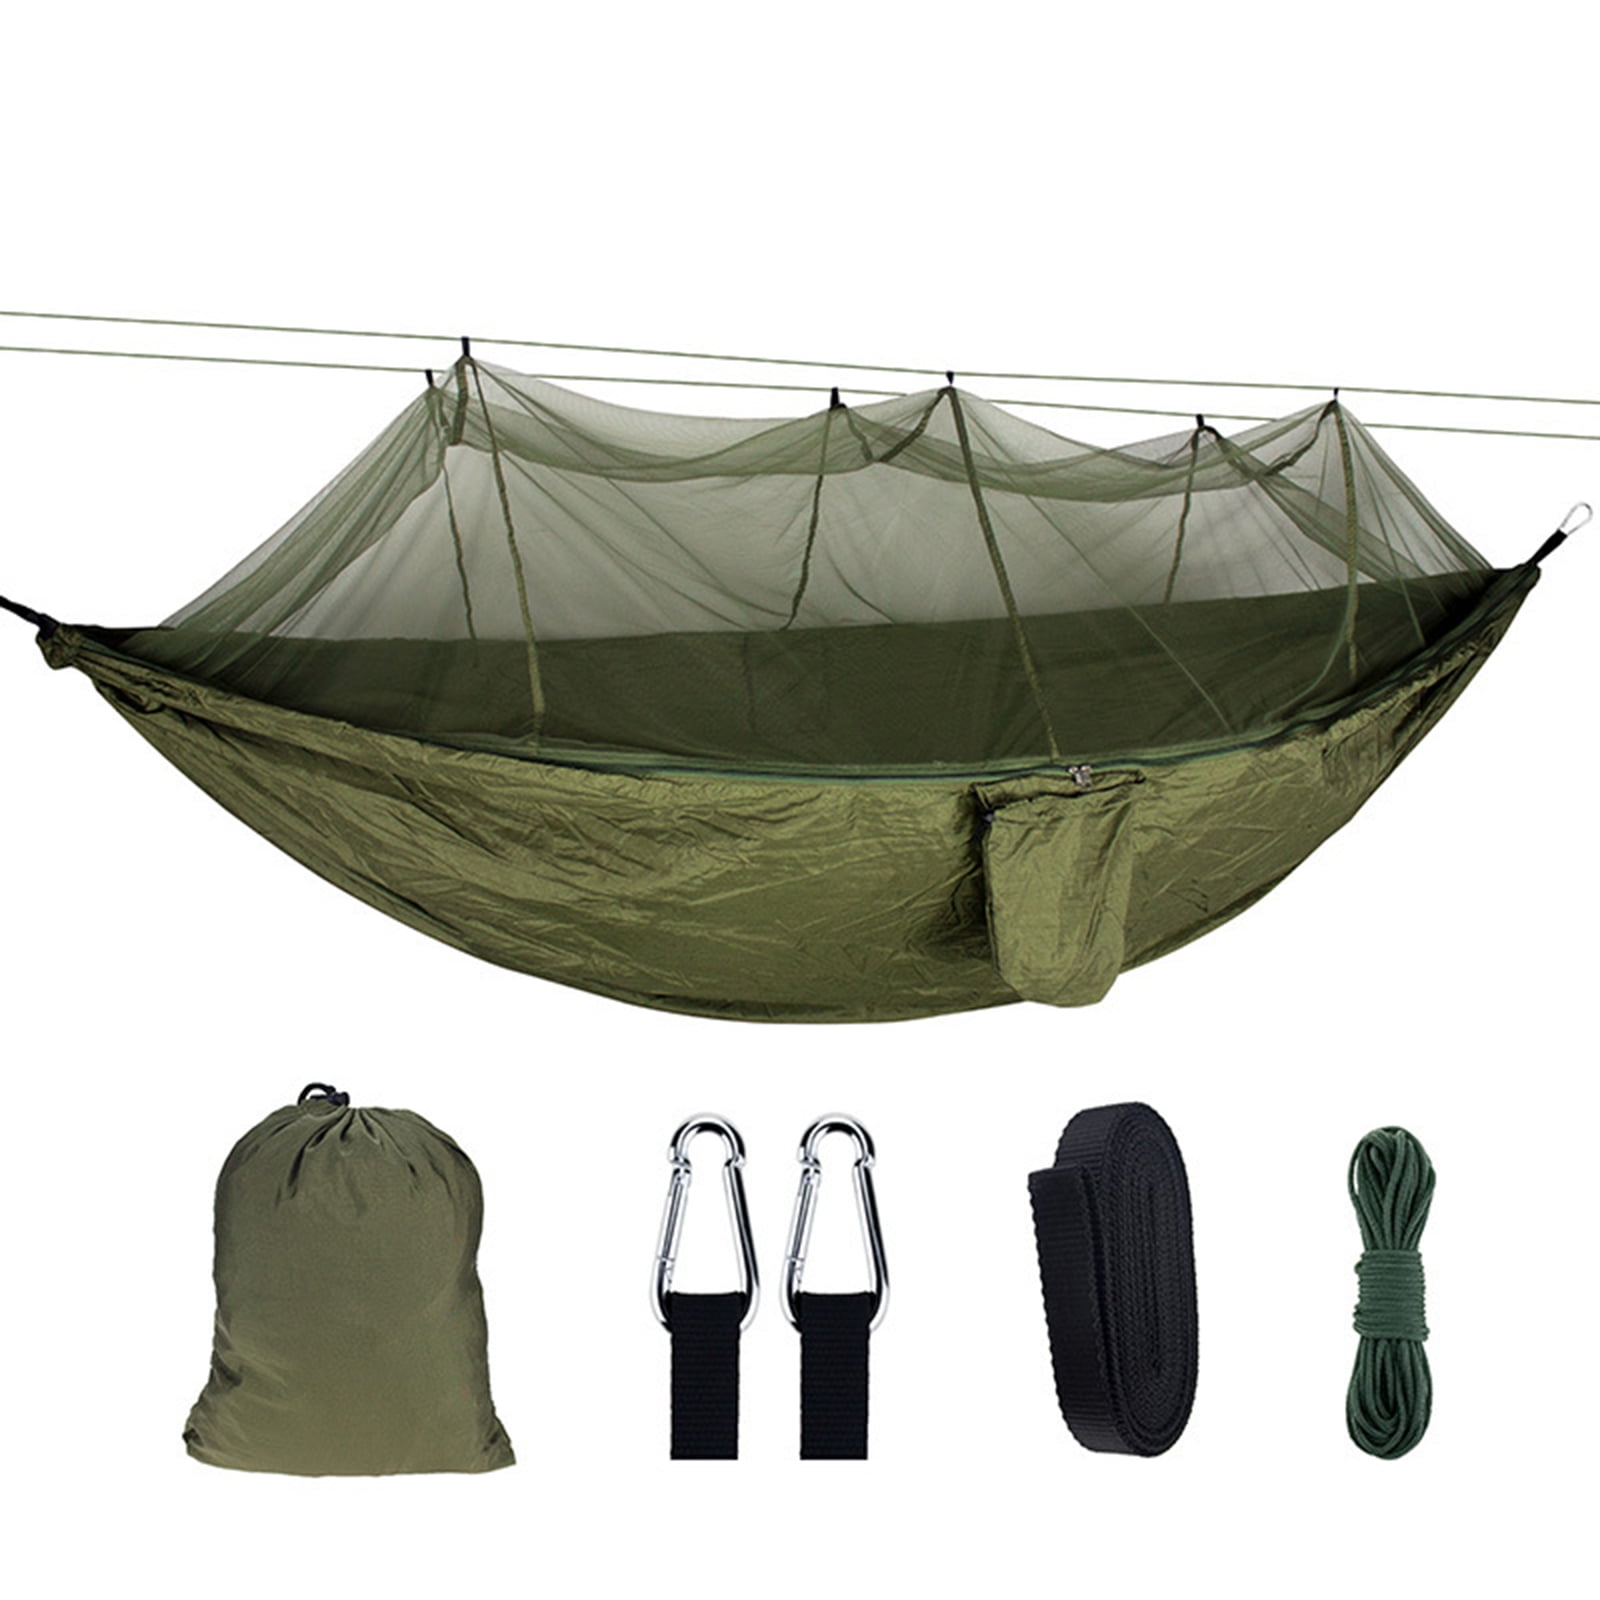 Portable Tent Camping Hammock Mosquito Net Cover Yard,Swing Bed Garden Outdoor